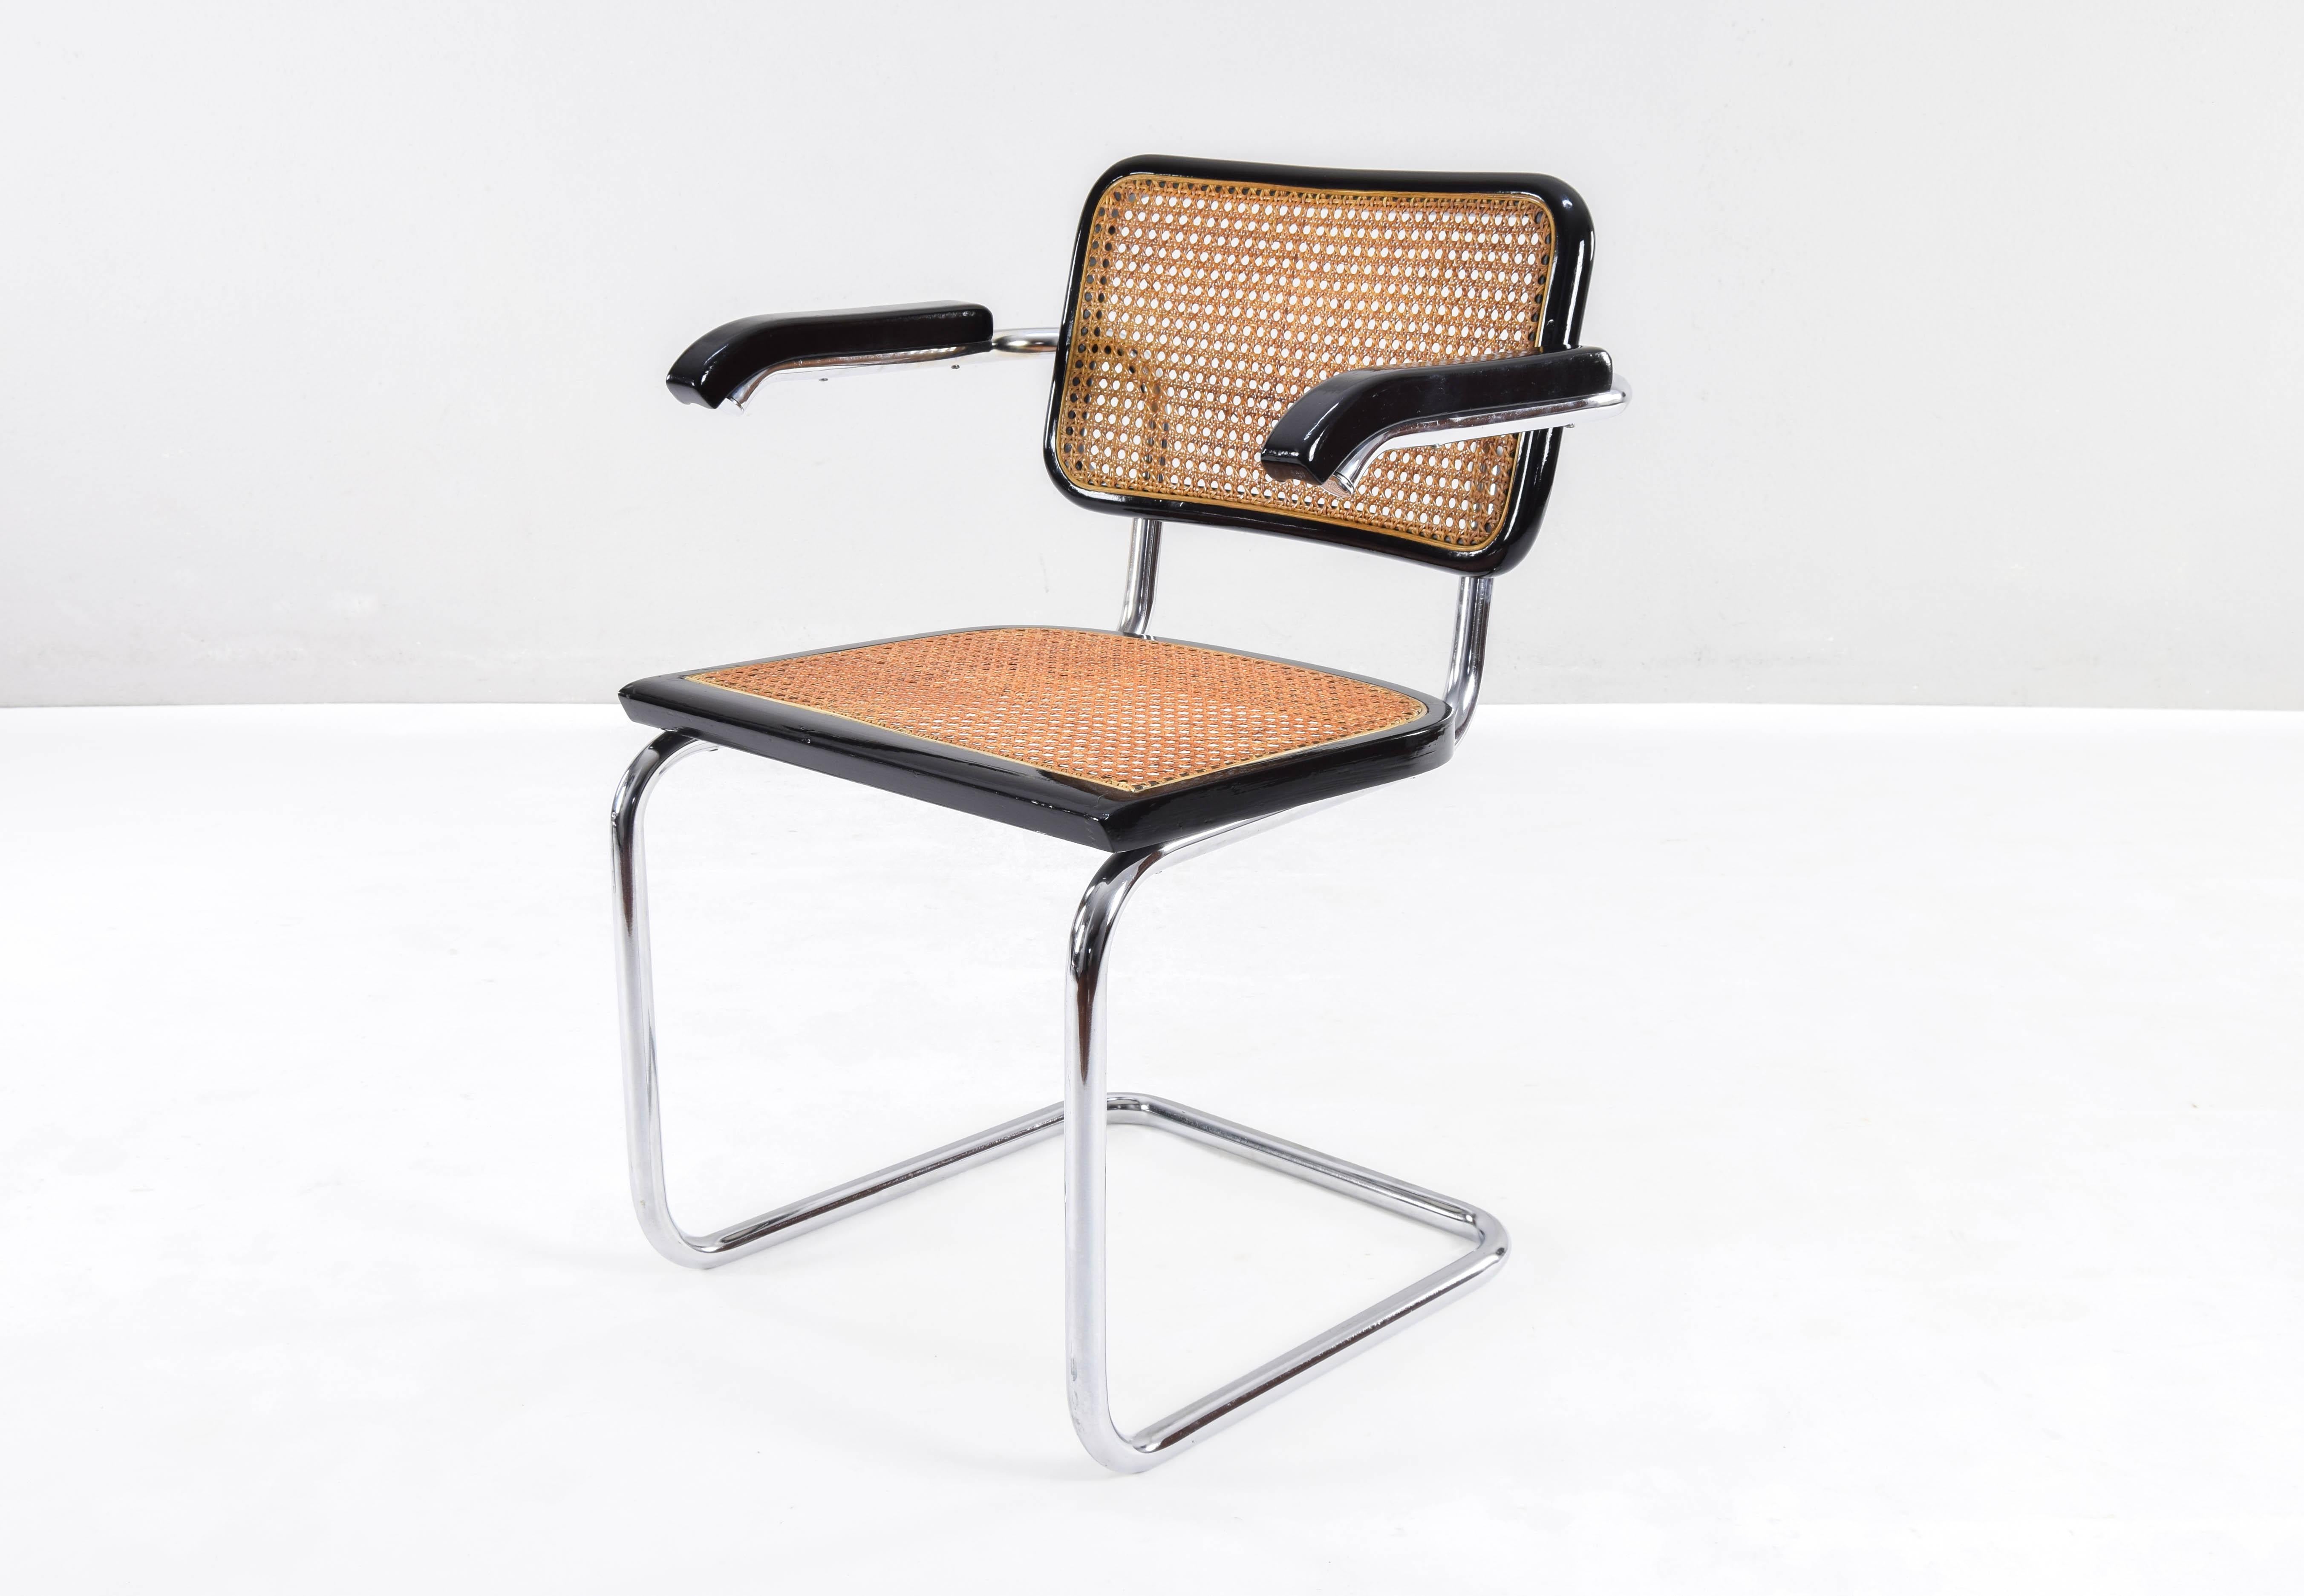 Cesca armchair model B64, Italy in the 1970s. This chair are part of a high quality edition.

Chrome tubular structure in good condition. Beech wood frames lacquered in black and Viennese natural grid. The natural fiber grille of the seat have